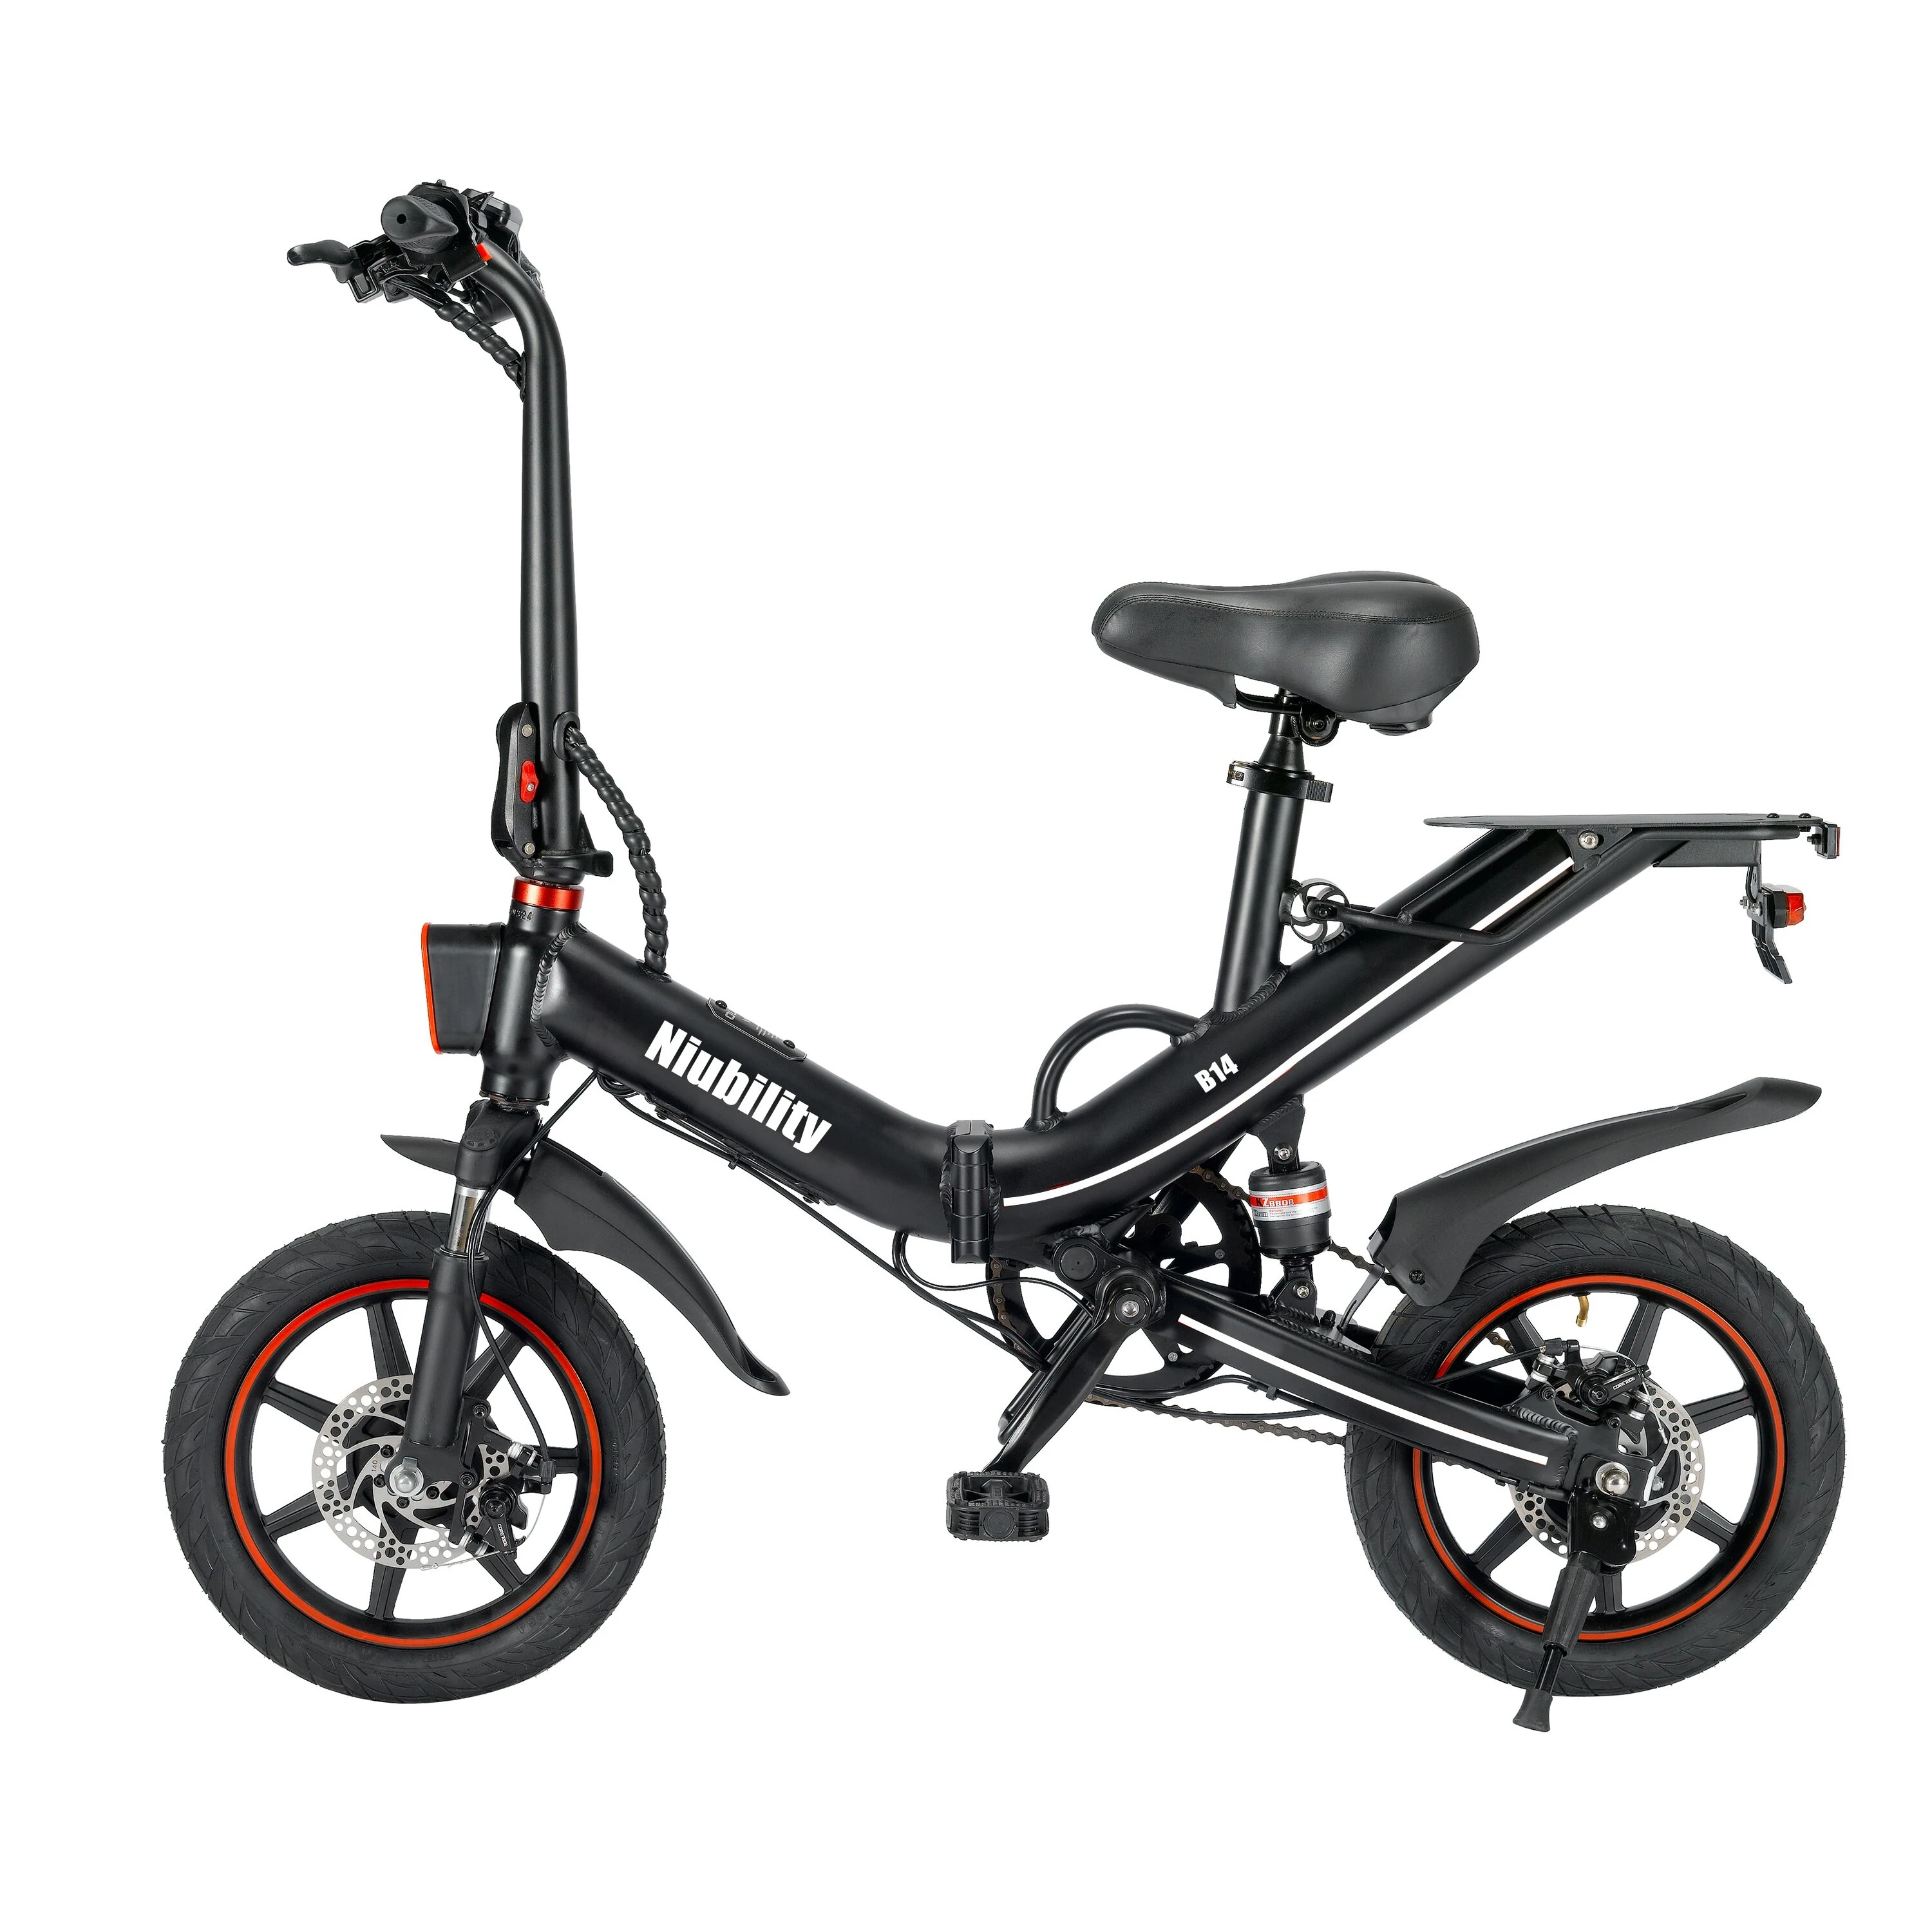 Niubility B14 – 400 watt bike for the price of a scooter